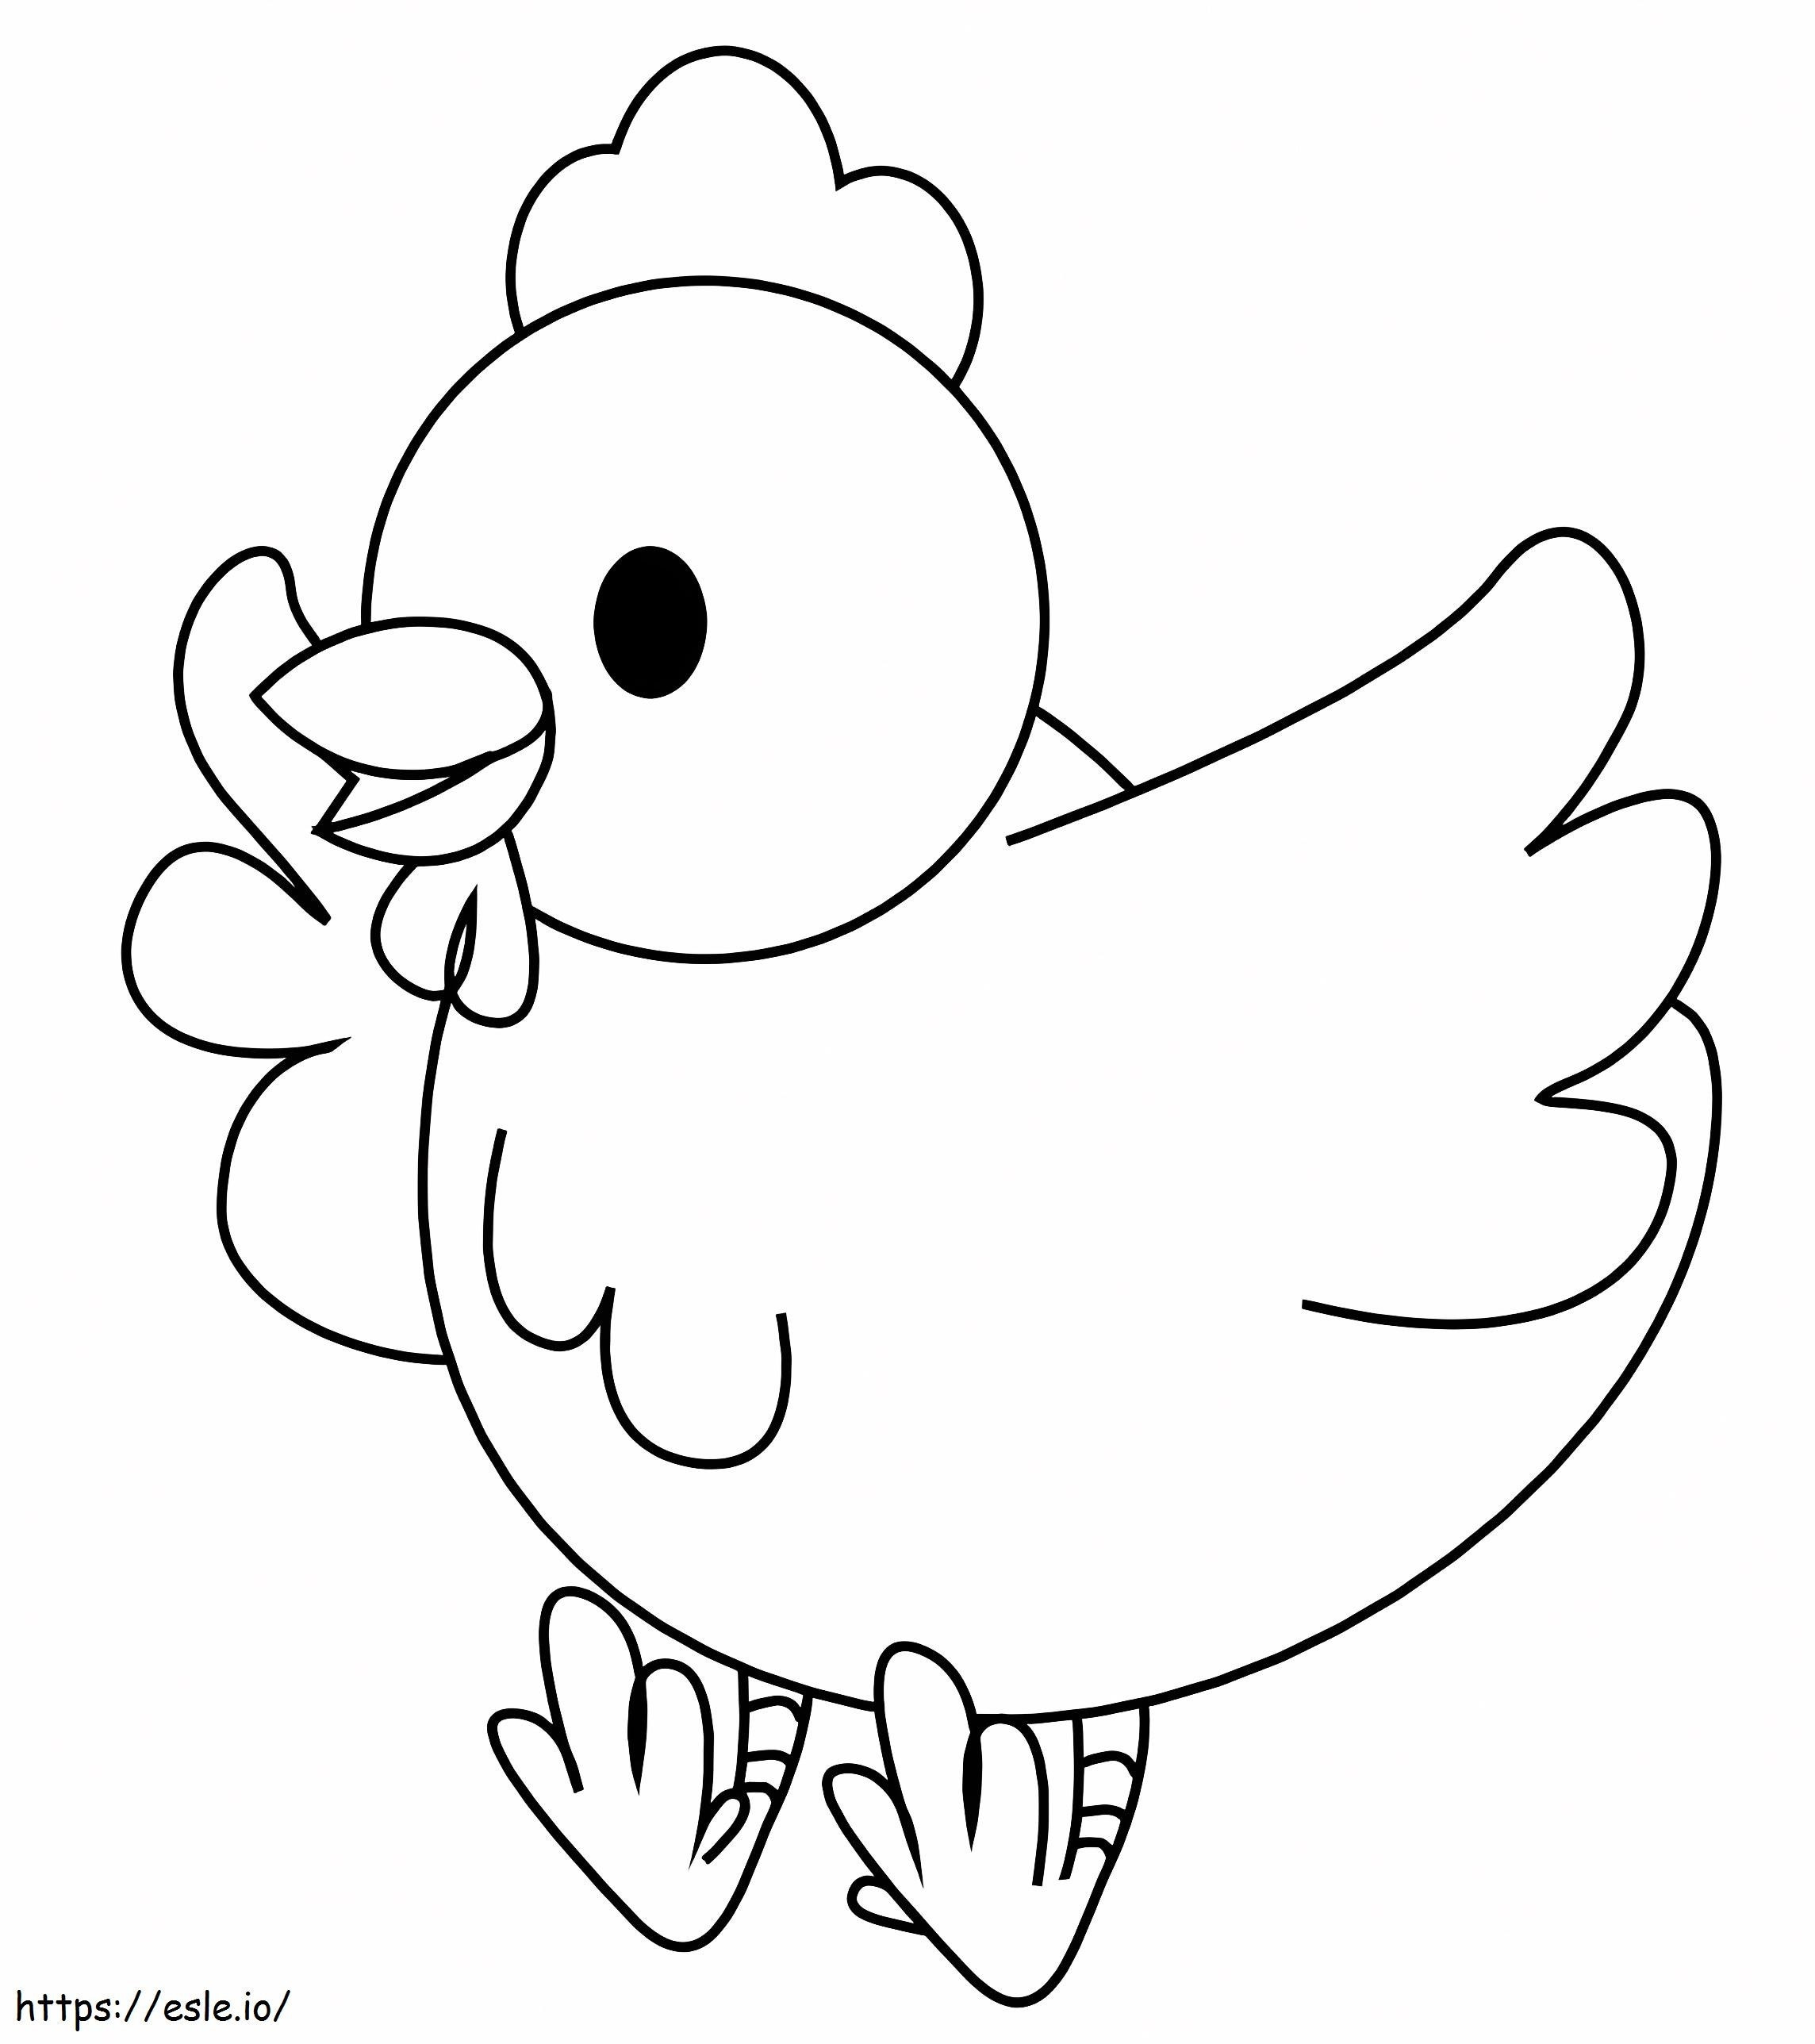 1560327026 Baby Chick A4 coloring page